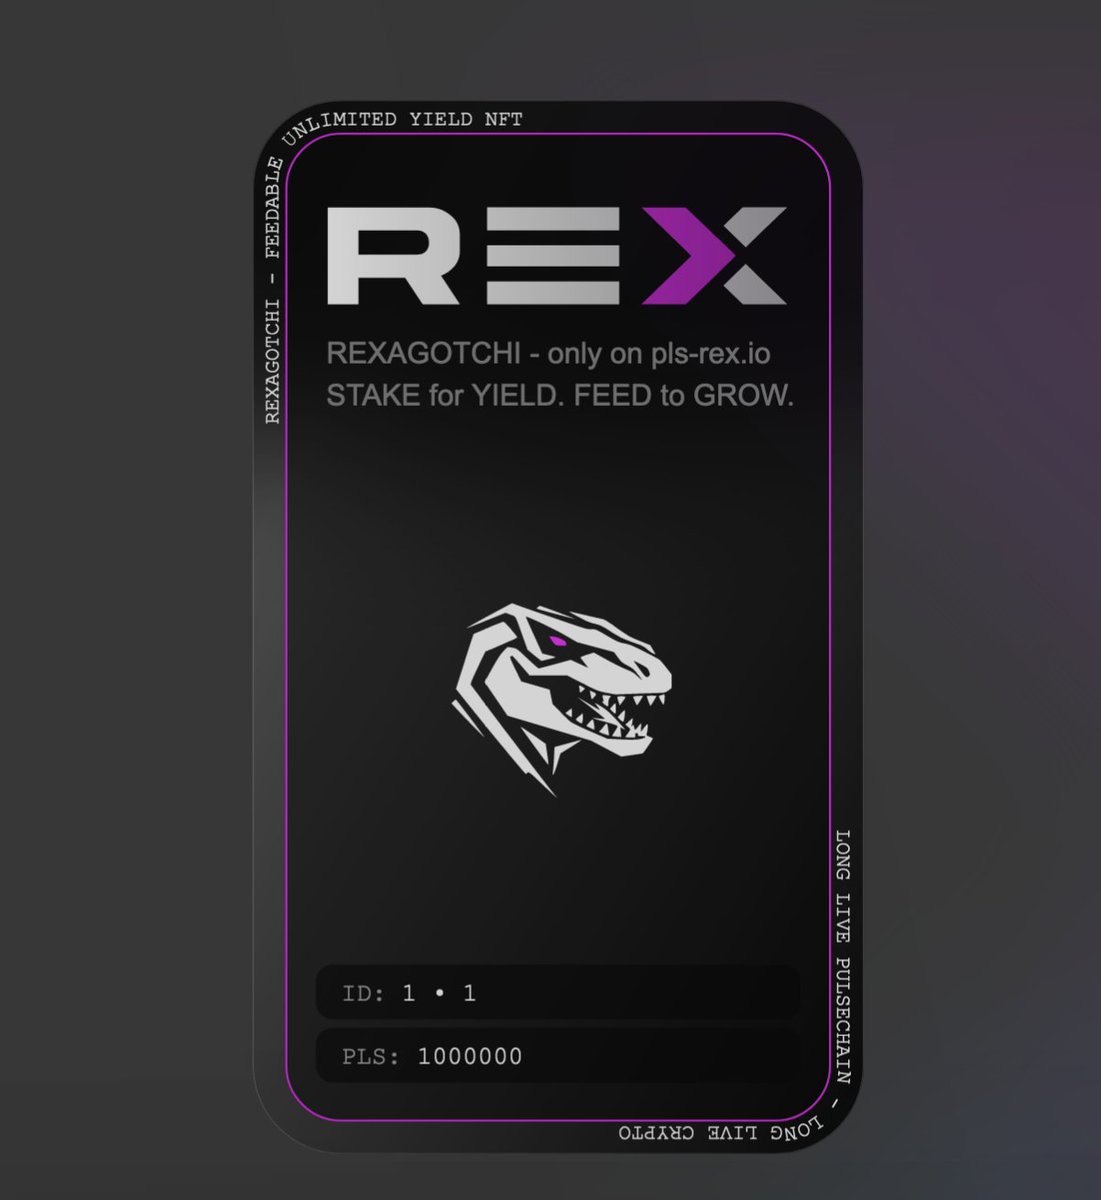 It's done. REXAGOTCHI #NFTs exist now. Stake for yield. Feed to grow. nftonpulse.io/collectionDeta… Get them on app.pls-rex.io .